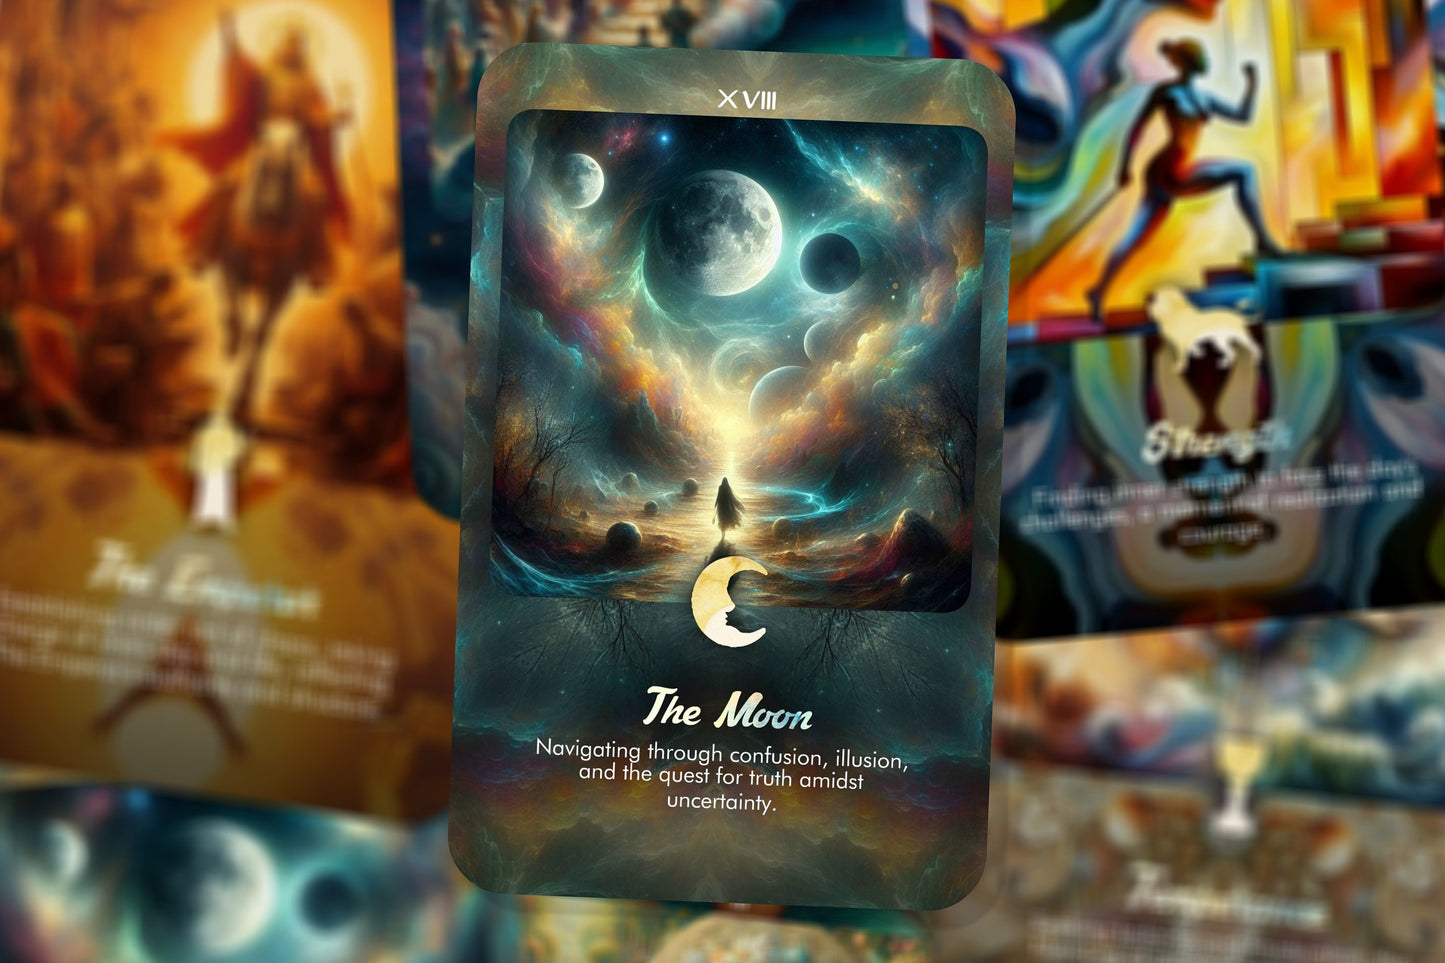 A Day in the Life - A Tarot Journey - Major Arcana - Every day is a step on the path of the soul's journey